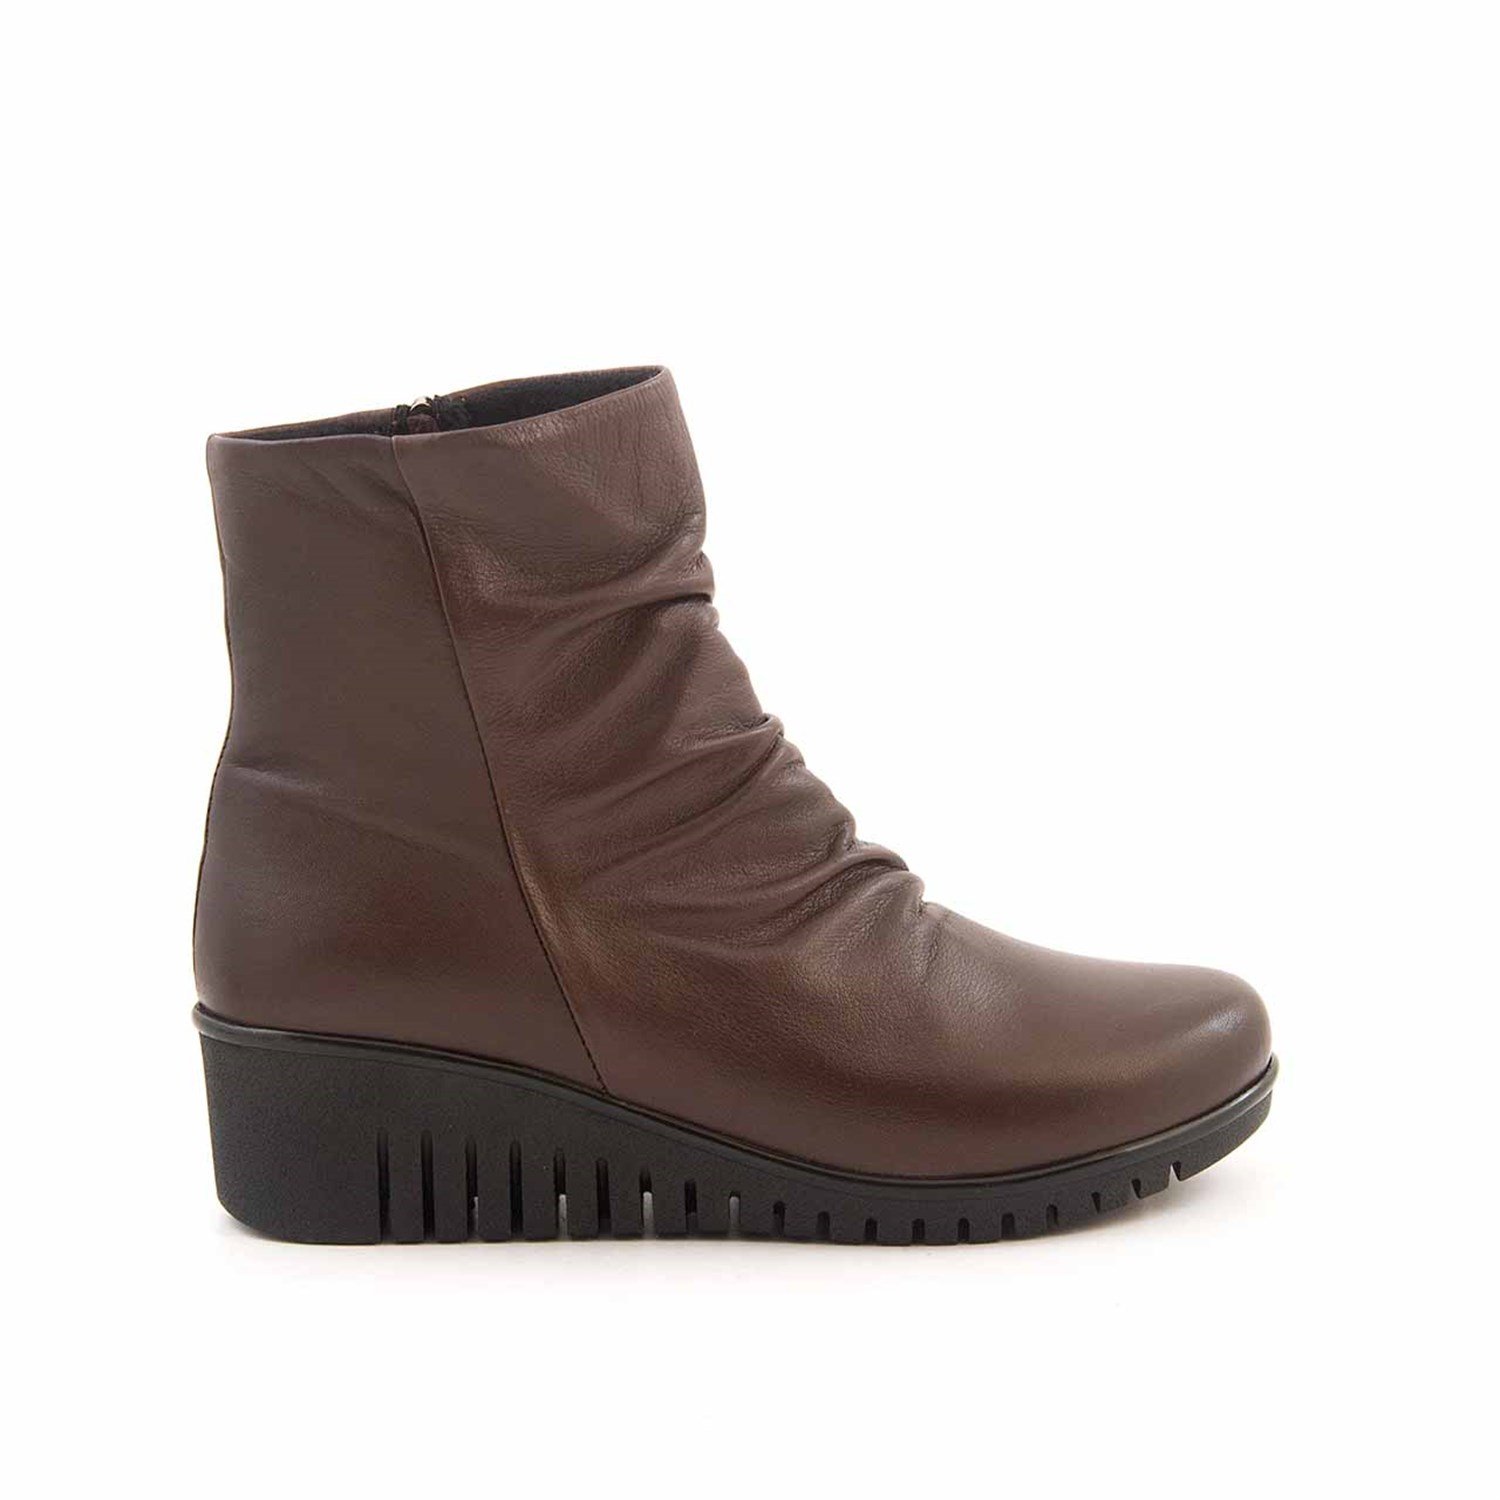 Kemal Tanca Women's Leather Boots